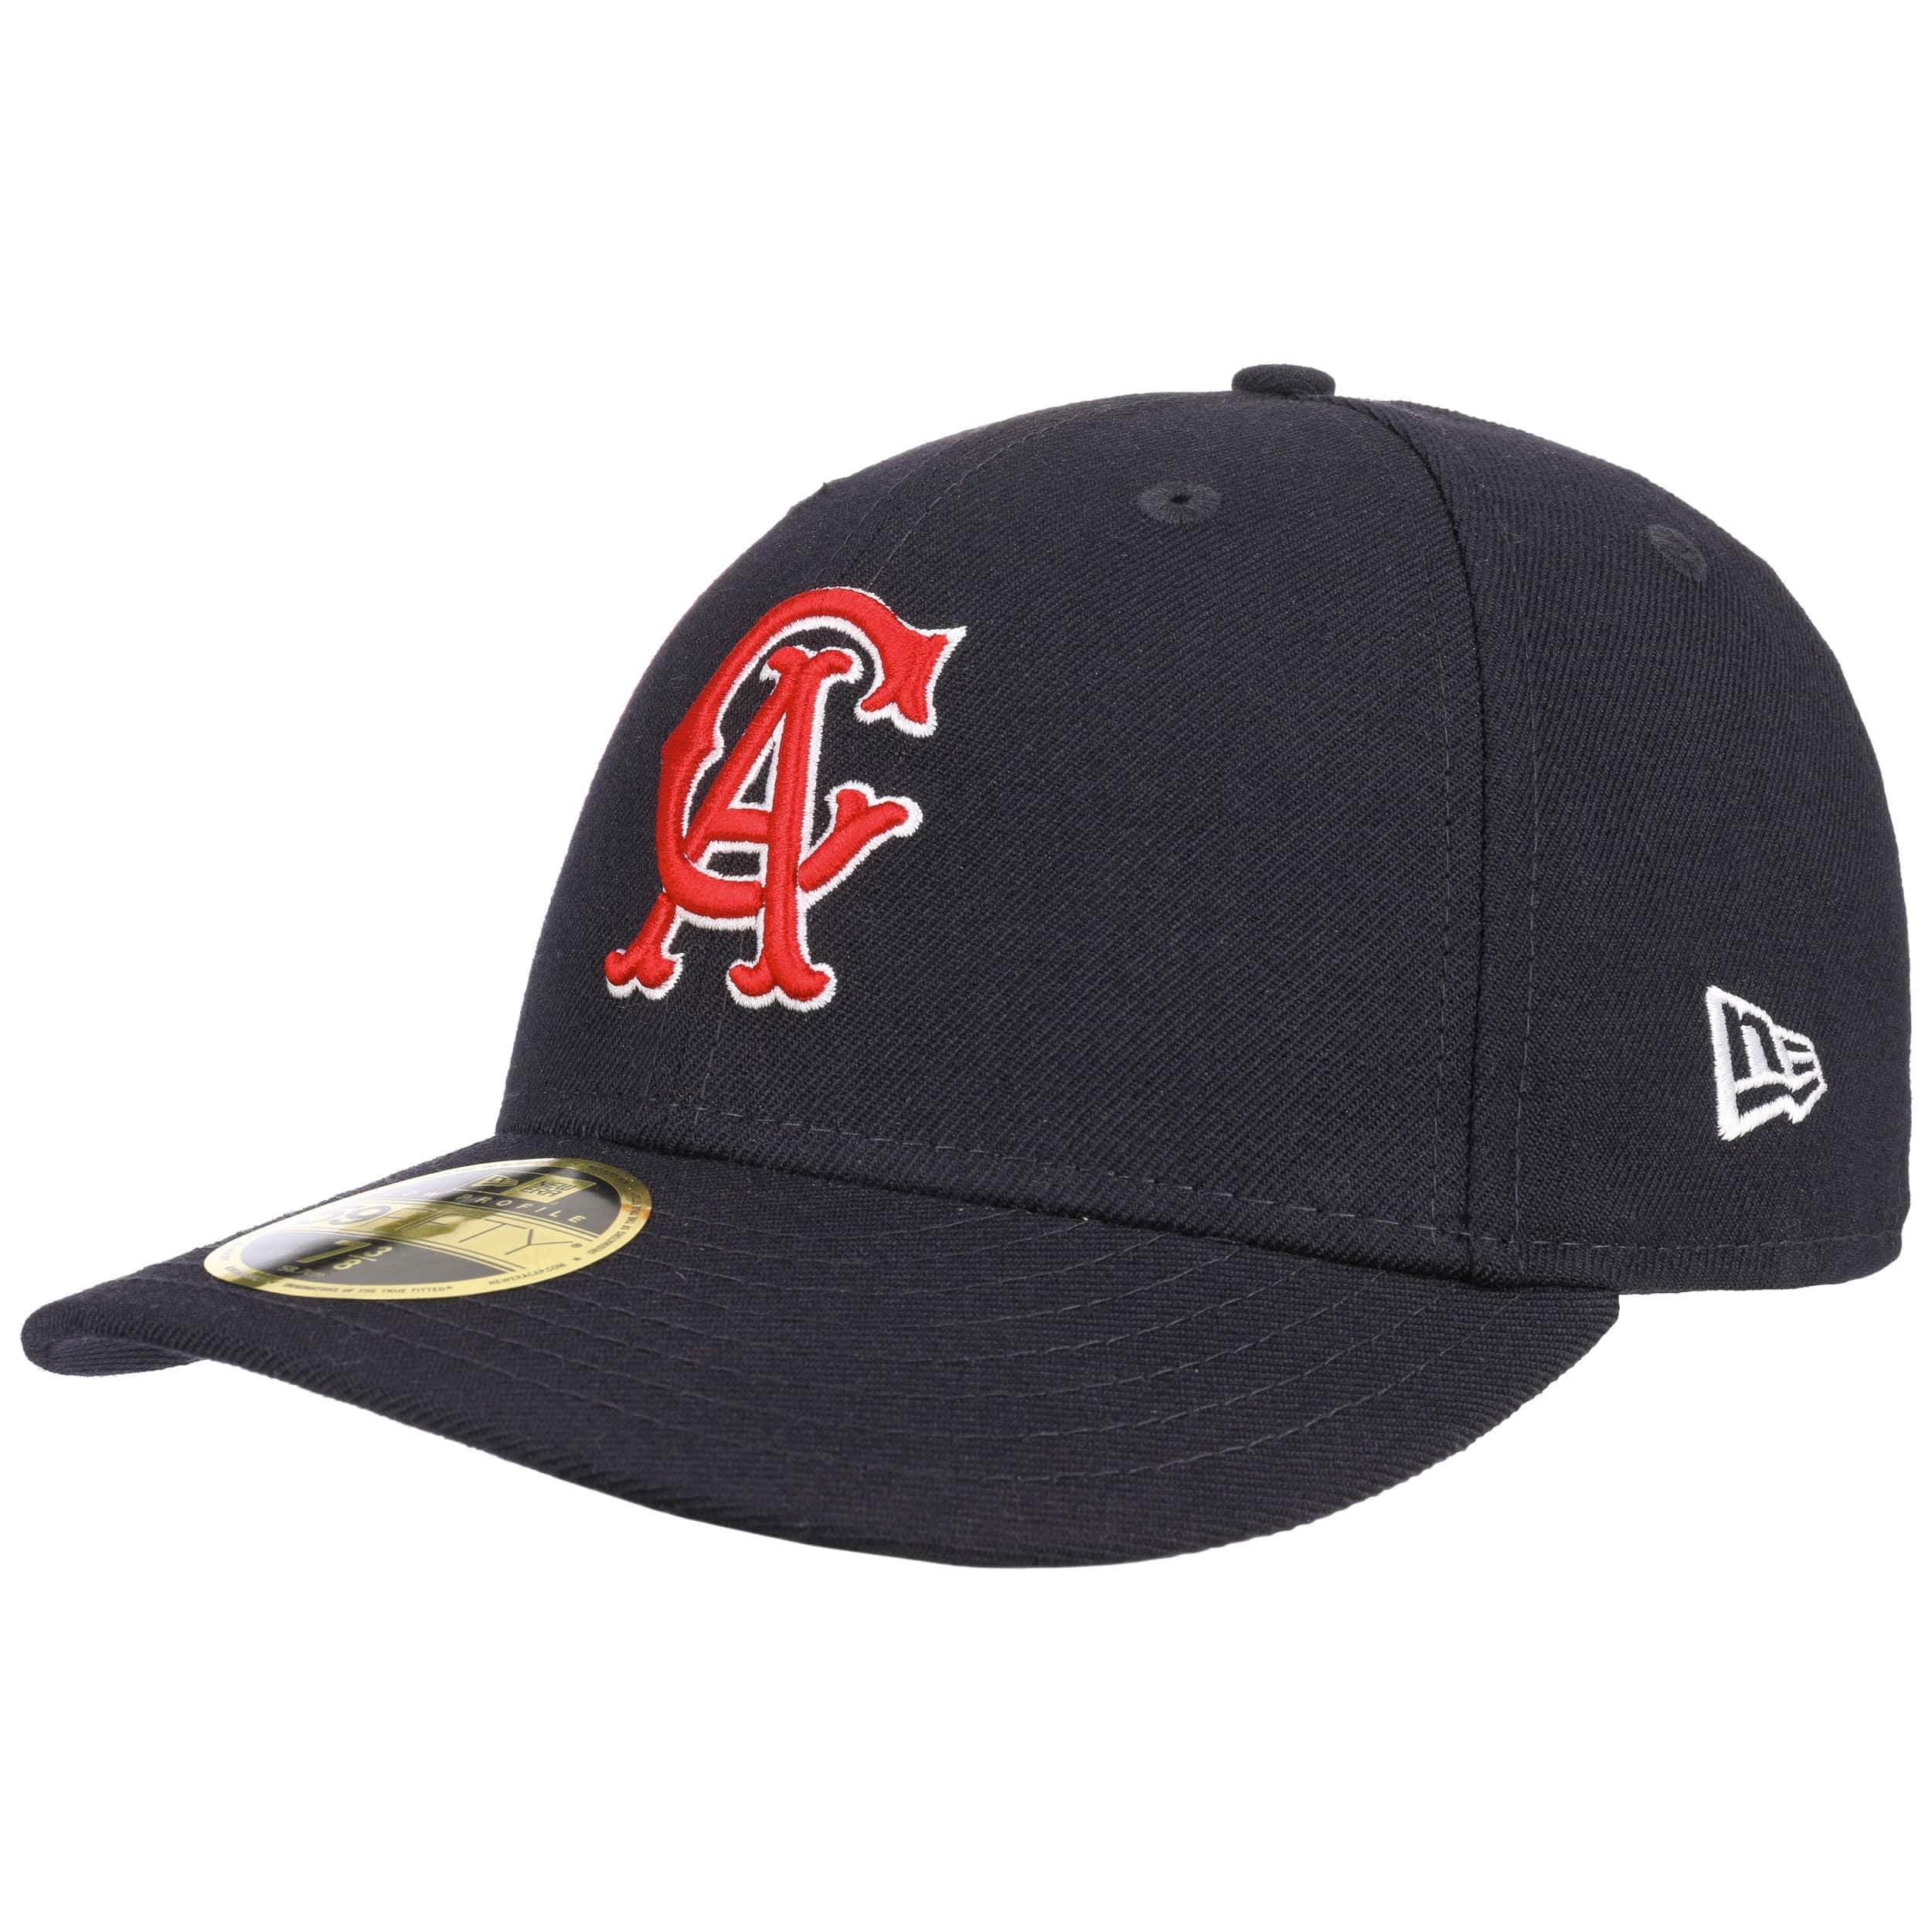 59Fifty Low Profile Wool Angels Cap by New Era